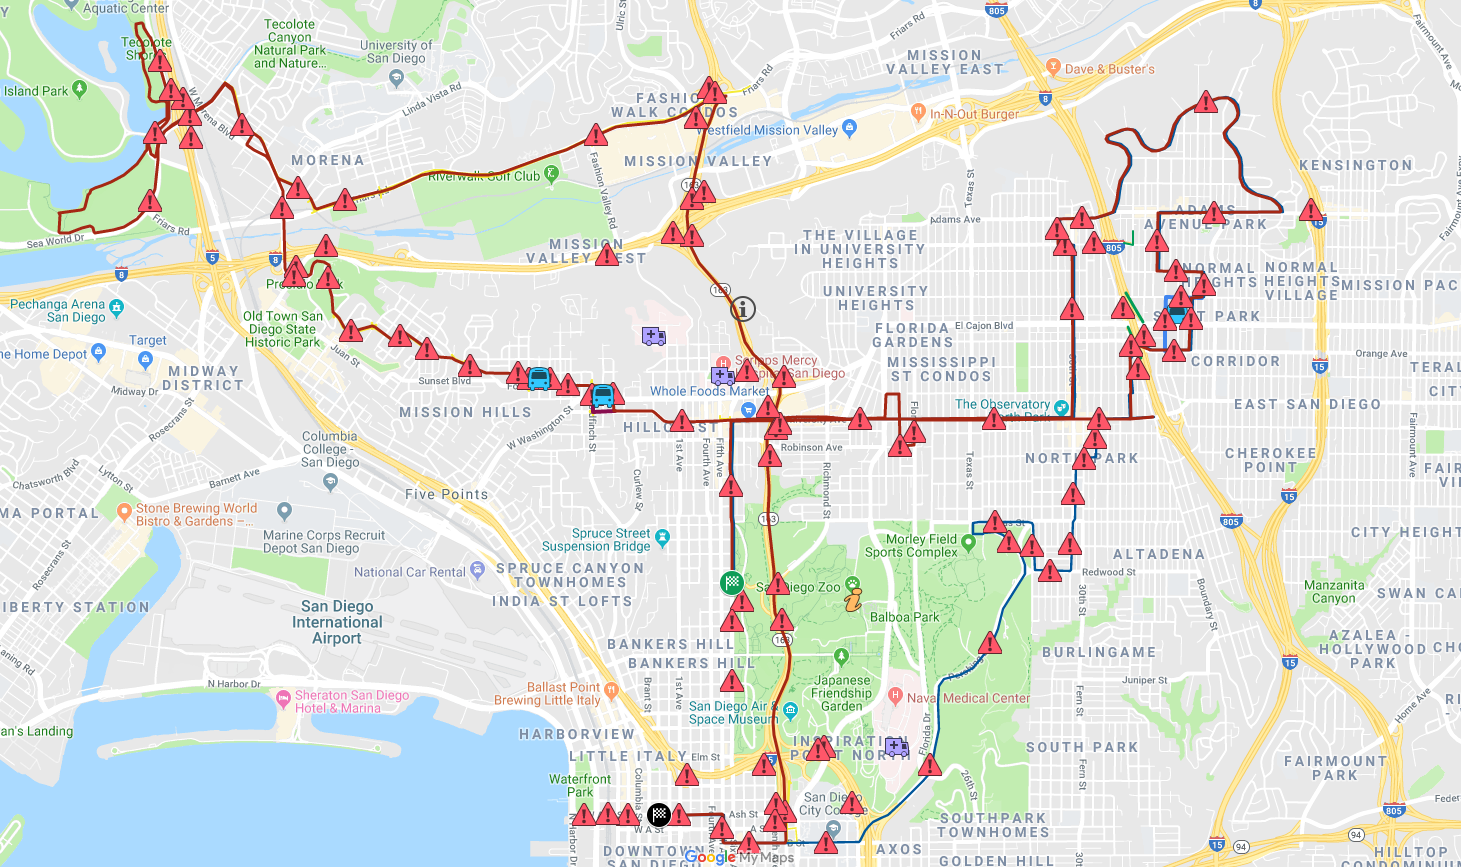 San Diego Rock And Roll Marathon Course Map Oakland Zoning Map